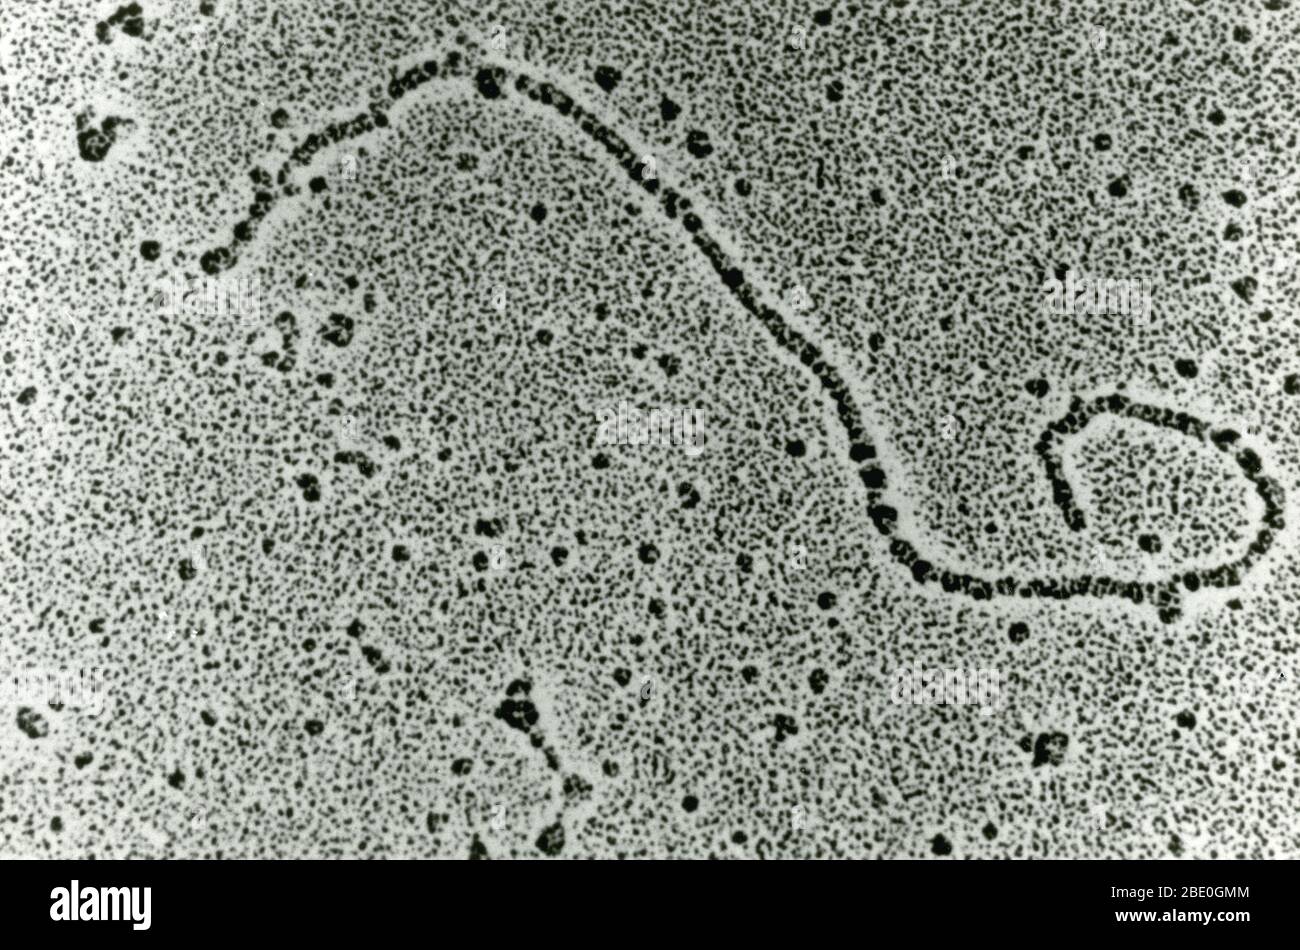 Transmission Electron Micrograph (TEM) of a single strand of Deoxyribonucleic acid (DNA). DNA is a molecule that carries the genetic instructions used in the growth, development, functioning and reproduction of all known living organisms and many viruses. DNA and ribonucleic acid (RNA) are nucleic acids; alongside proteins, lipids and complex carbohydrates (polysaccharides), they are one of the four major types of macromolecules that are essential for all known forms of life. Most DNA molecules consist of two biopolymer strands coiled around each other to form a double helix. DNA is comprised Stock Photo